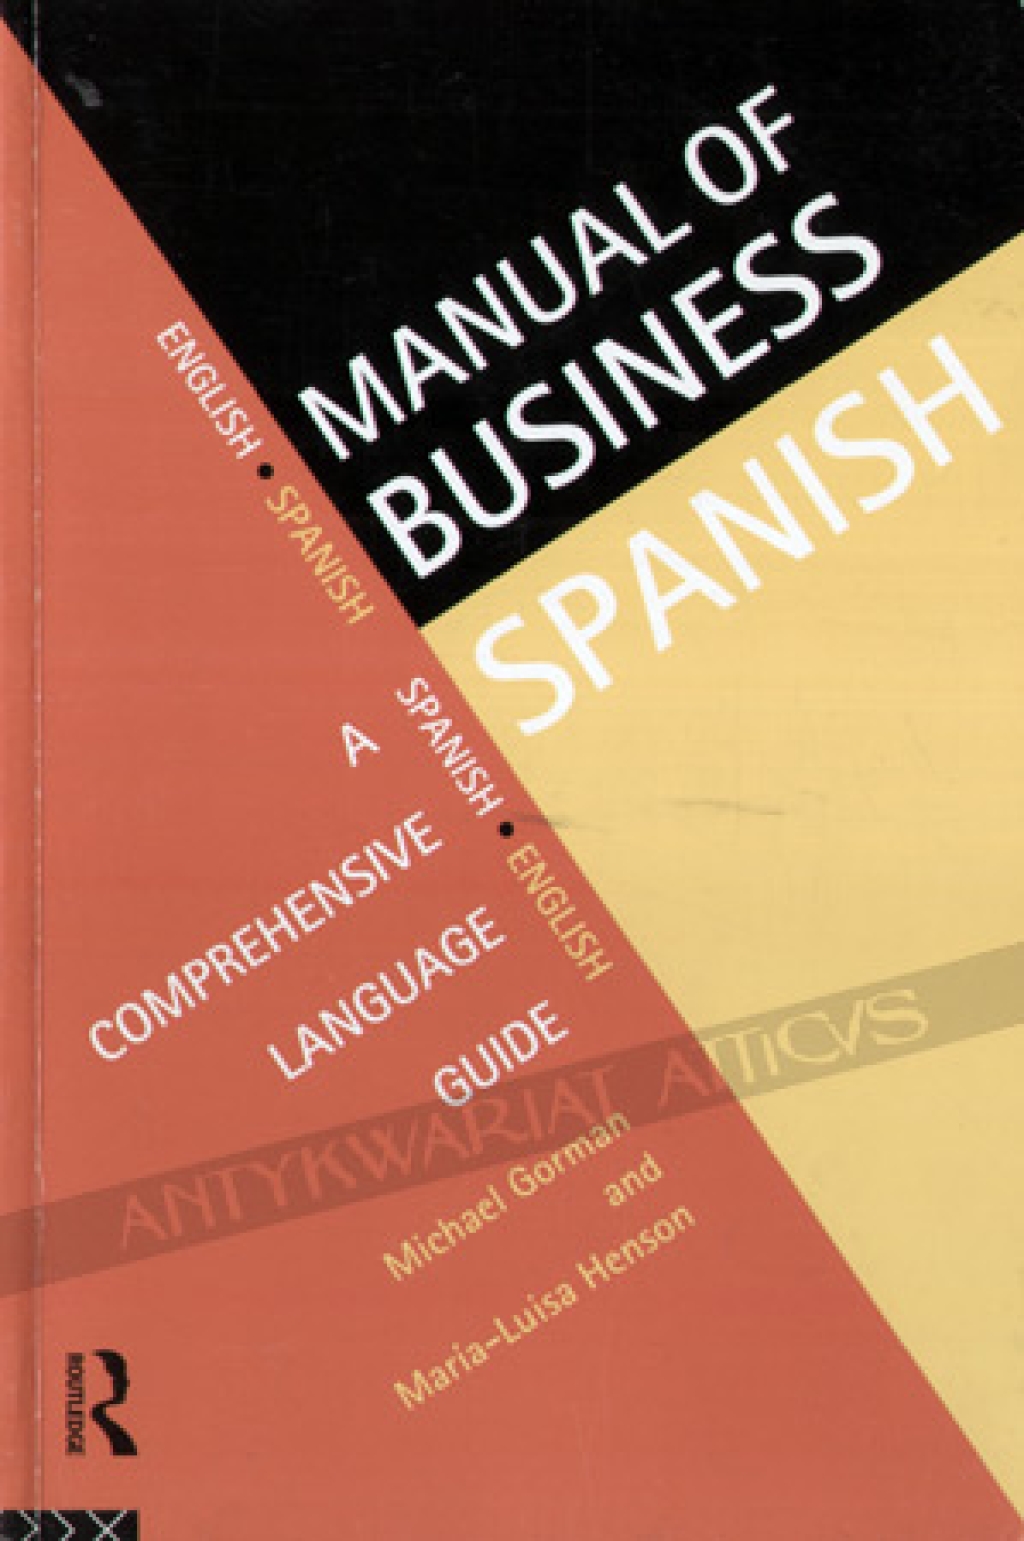 Manual of Business Spanish. A comprehensive language guide